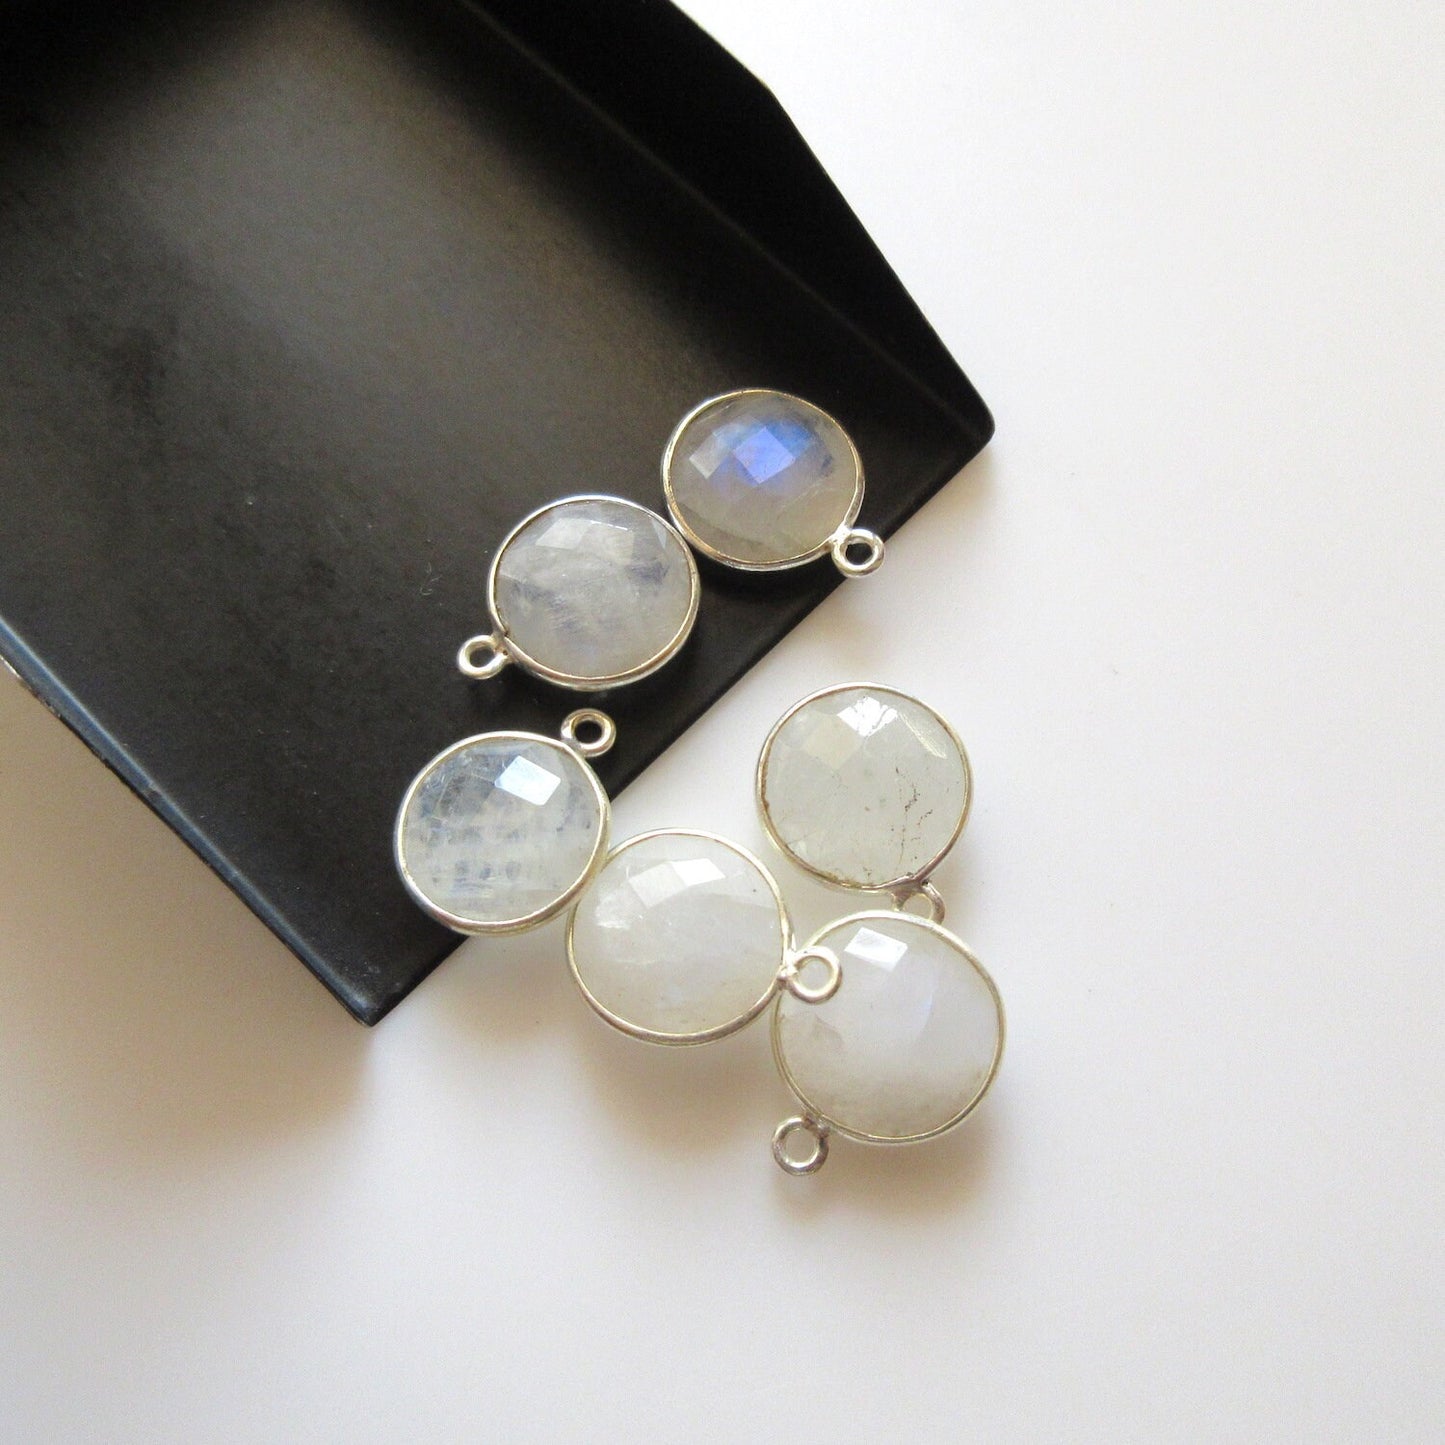 10 Pieces Rainbow Moonstone Faceted Coin Round Bezel Connectors, 7.5mm Sterling Silver Single/Double Loop Gemstone Connector Charms, GDS1609